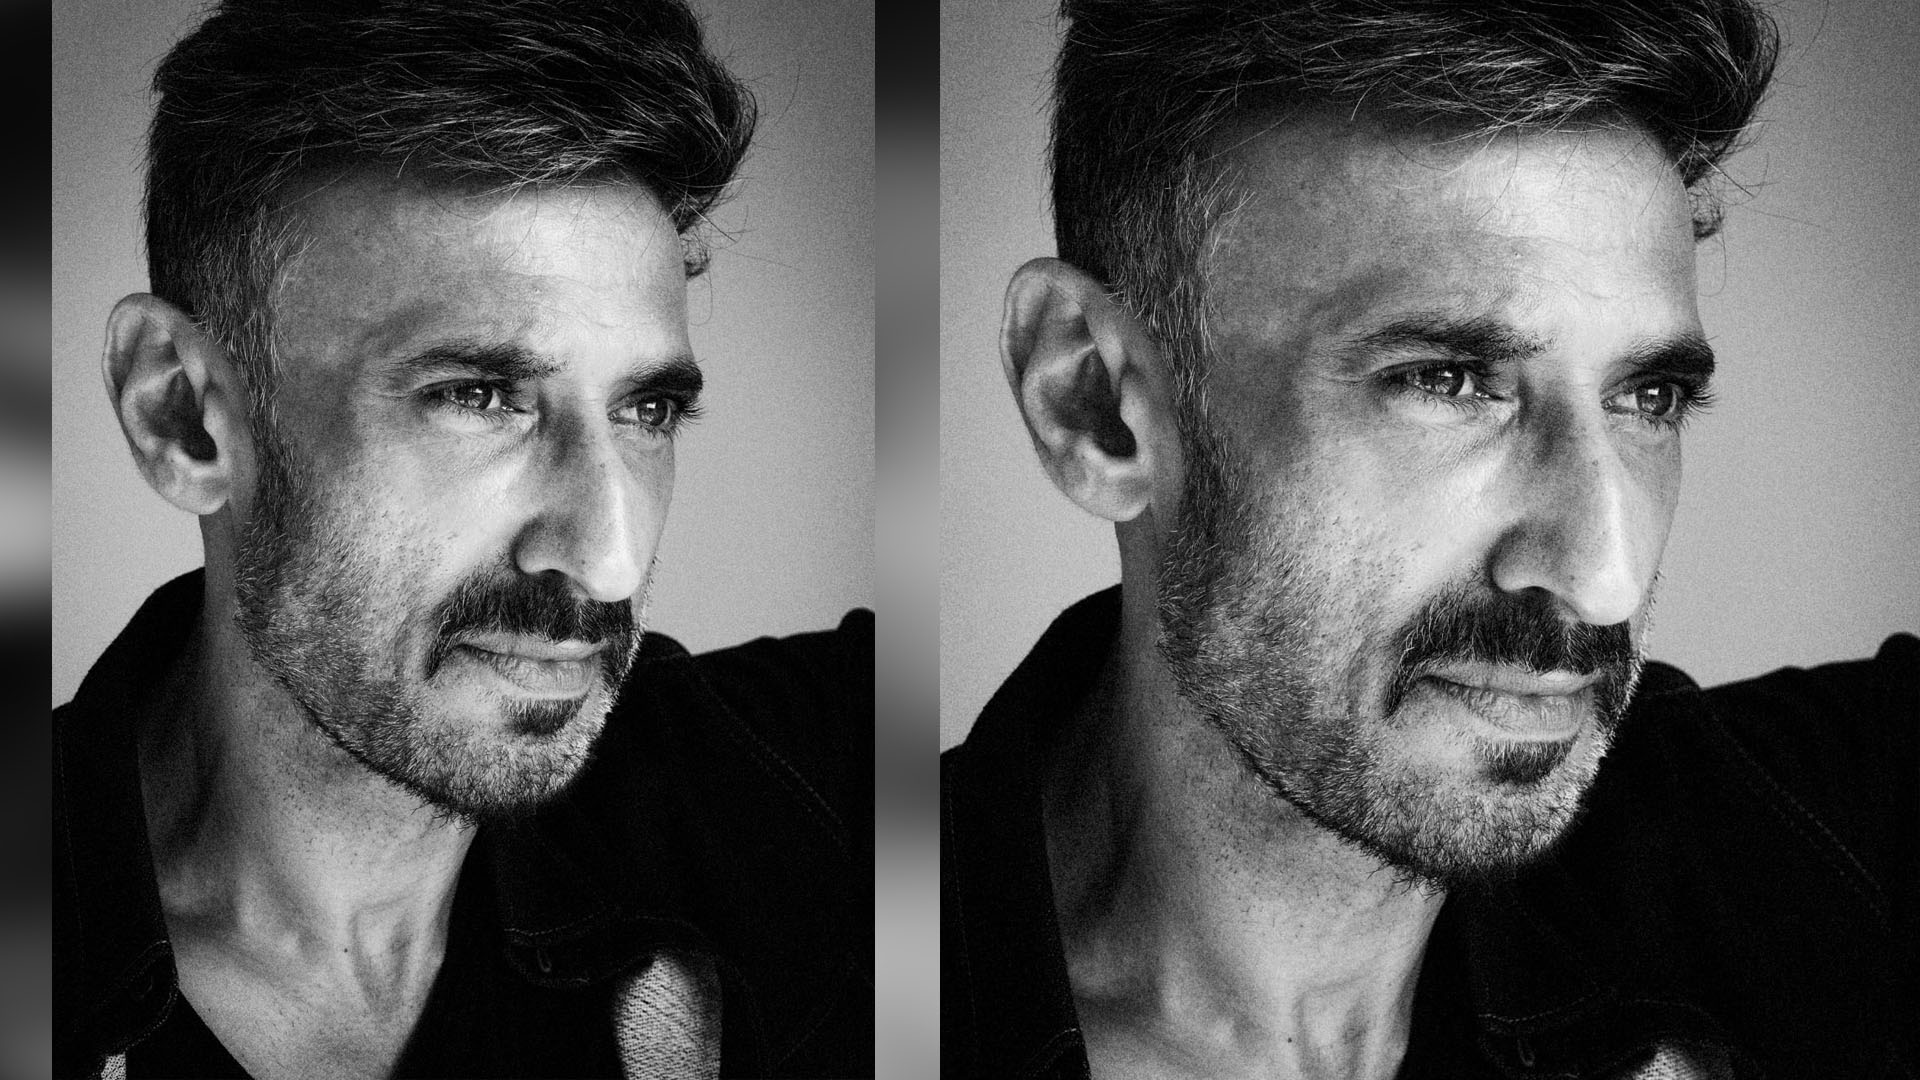 ‘Rahul Dev’s features in the Upcoming Movie Dhoop Chhaon which releases on 4th Nov’